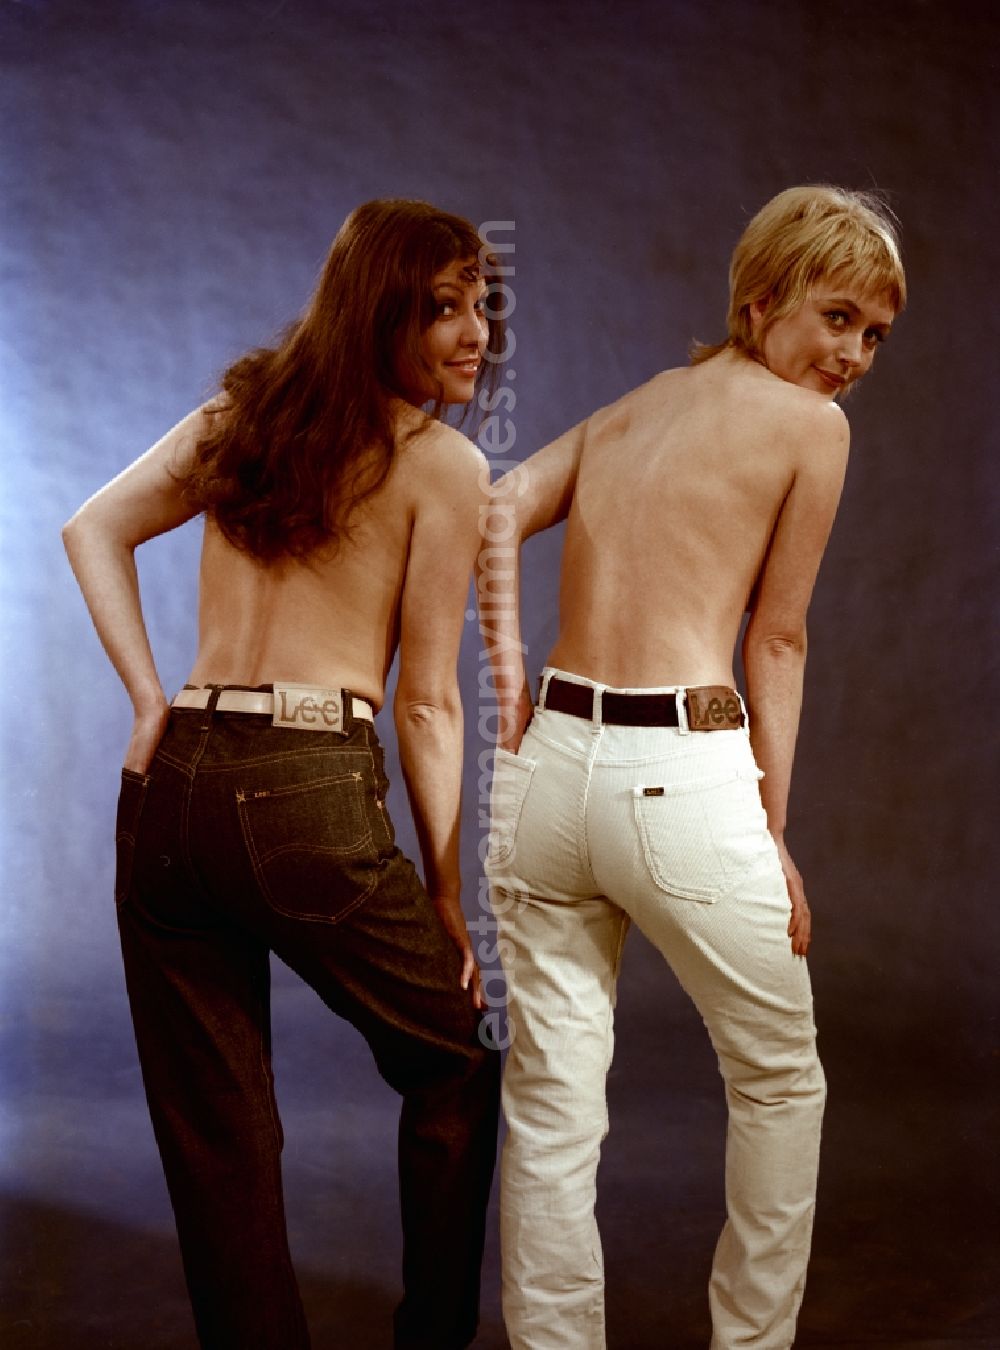 GDR photo archive: Berlin - Models show the latest jeans fashion for women from the company Lee in Berlin, the former capital of the GDR, German Democratic Republic